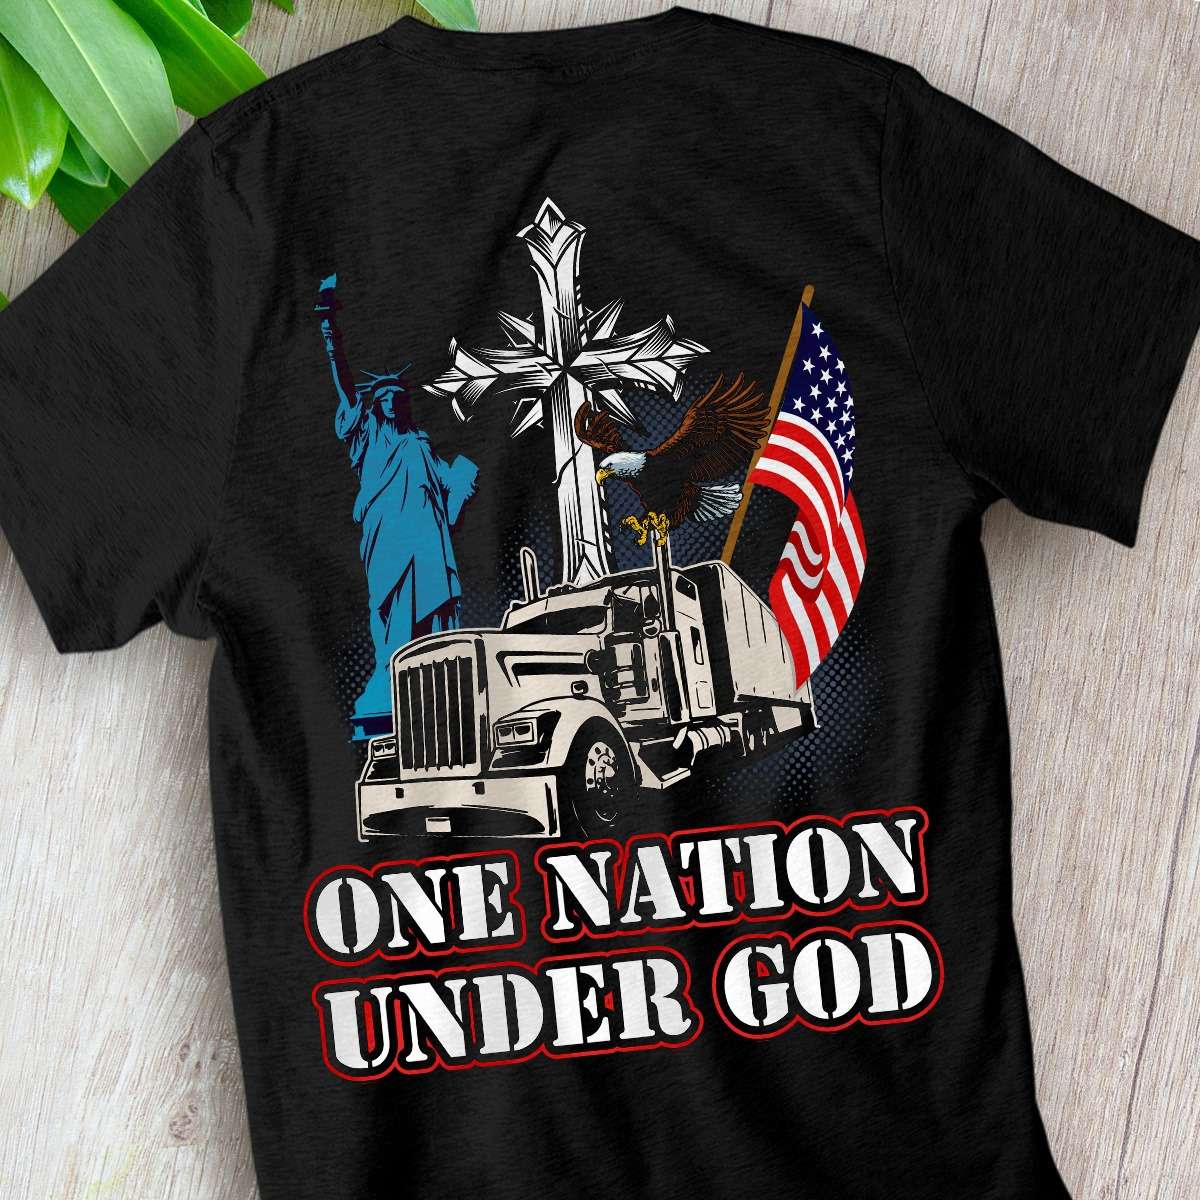 One nation under god - Statue of Liberty, American truck driver